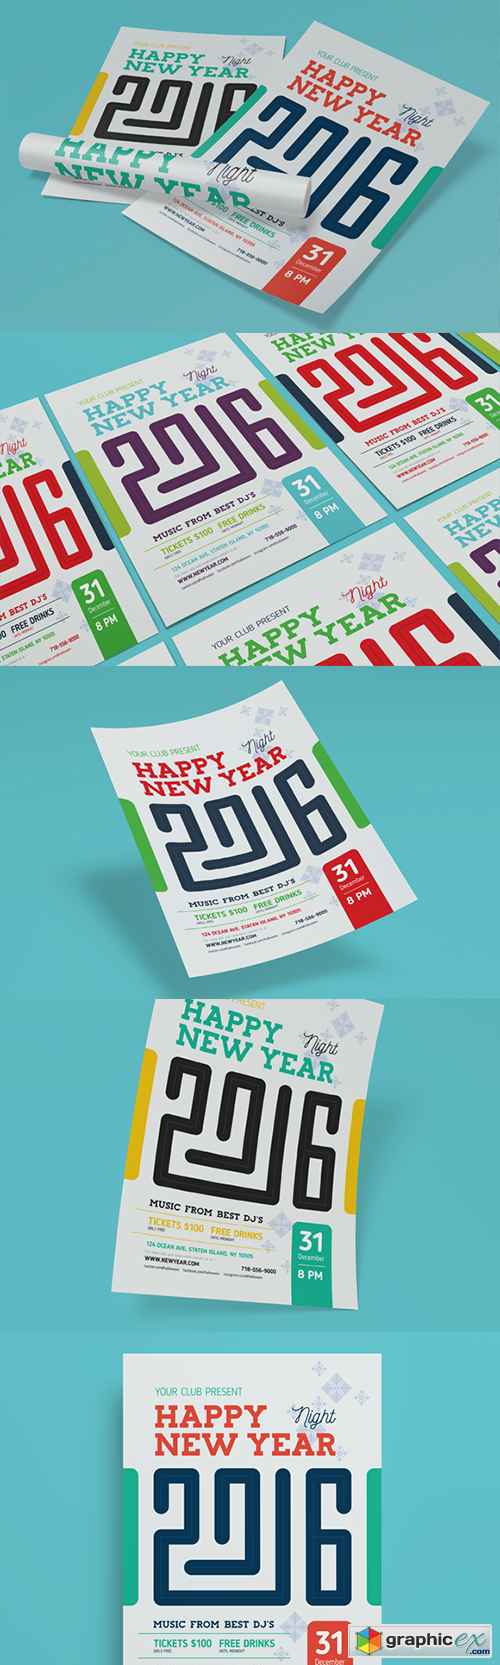 2016 New Year Poster